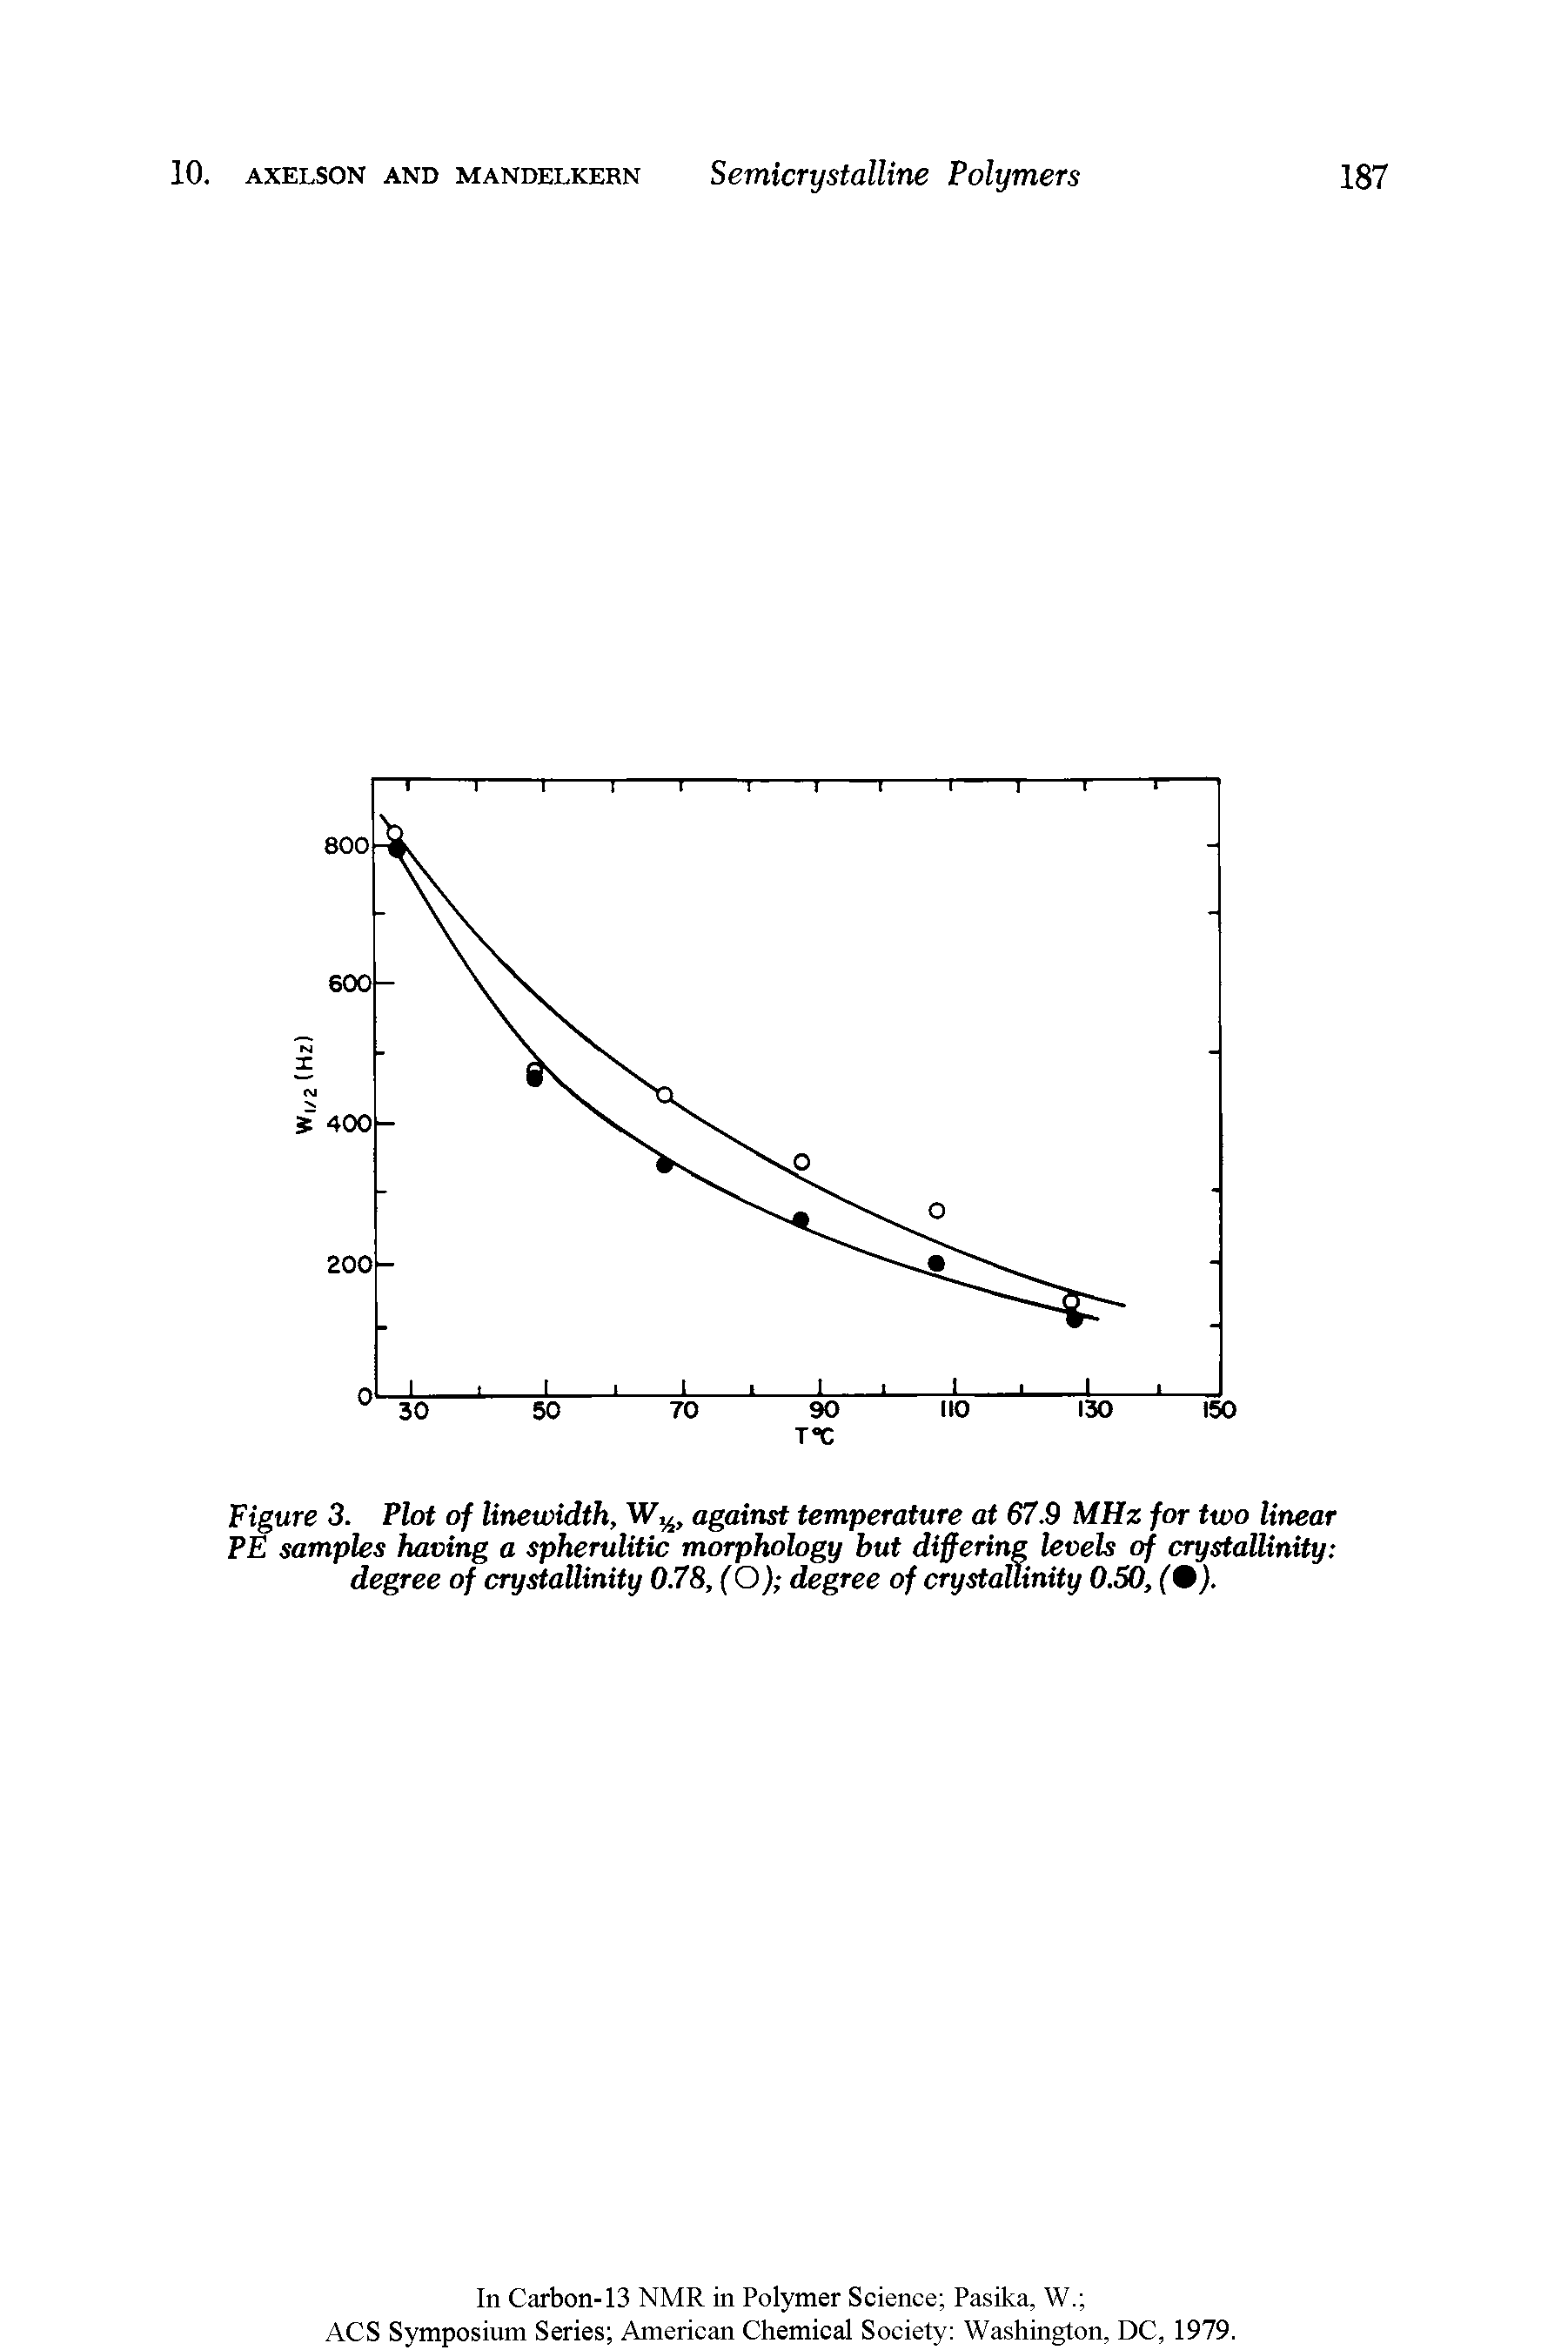 Figure 3. Plot of linewidth, against temperature at 67.9 MHz for two linear PE samples having a spherulitic morphology but differing levels of crystallinity degree of cryHallinity 0.78, (O) degree of crystallinity 0.50, (9).